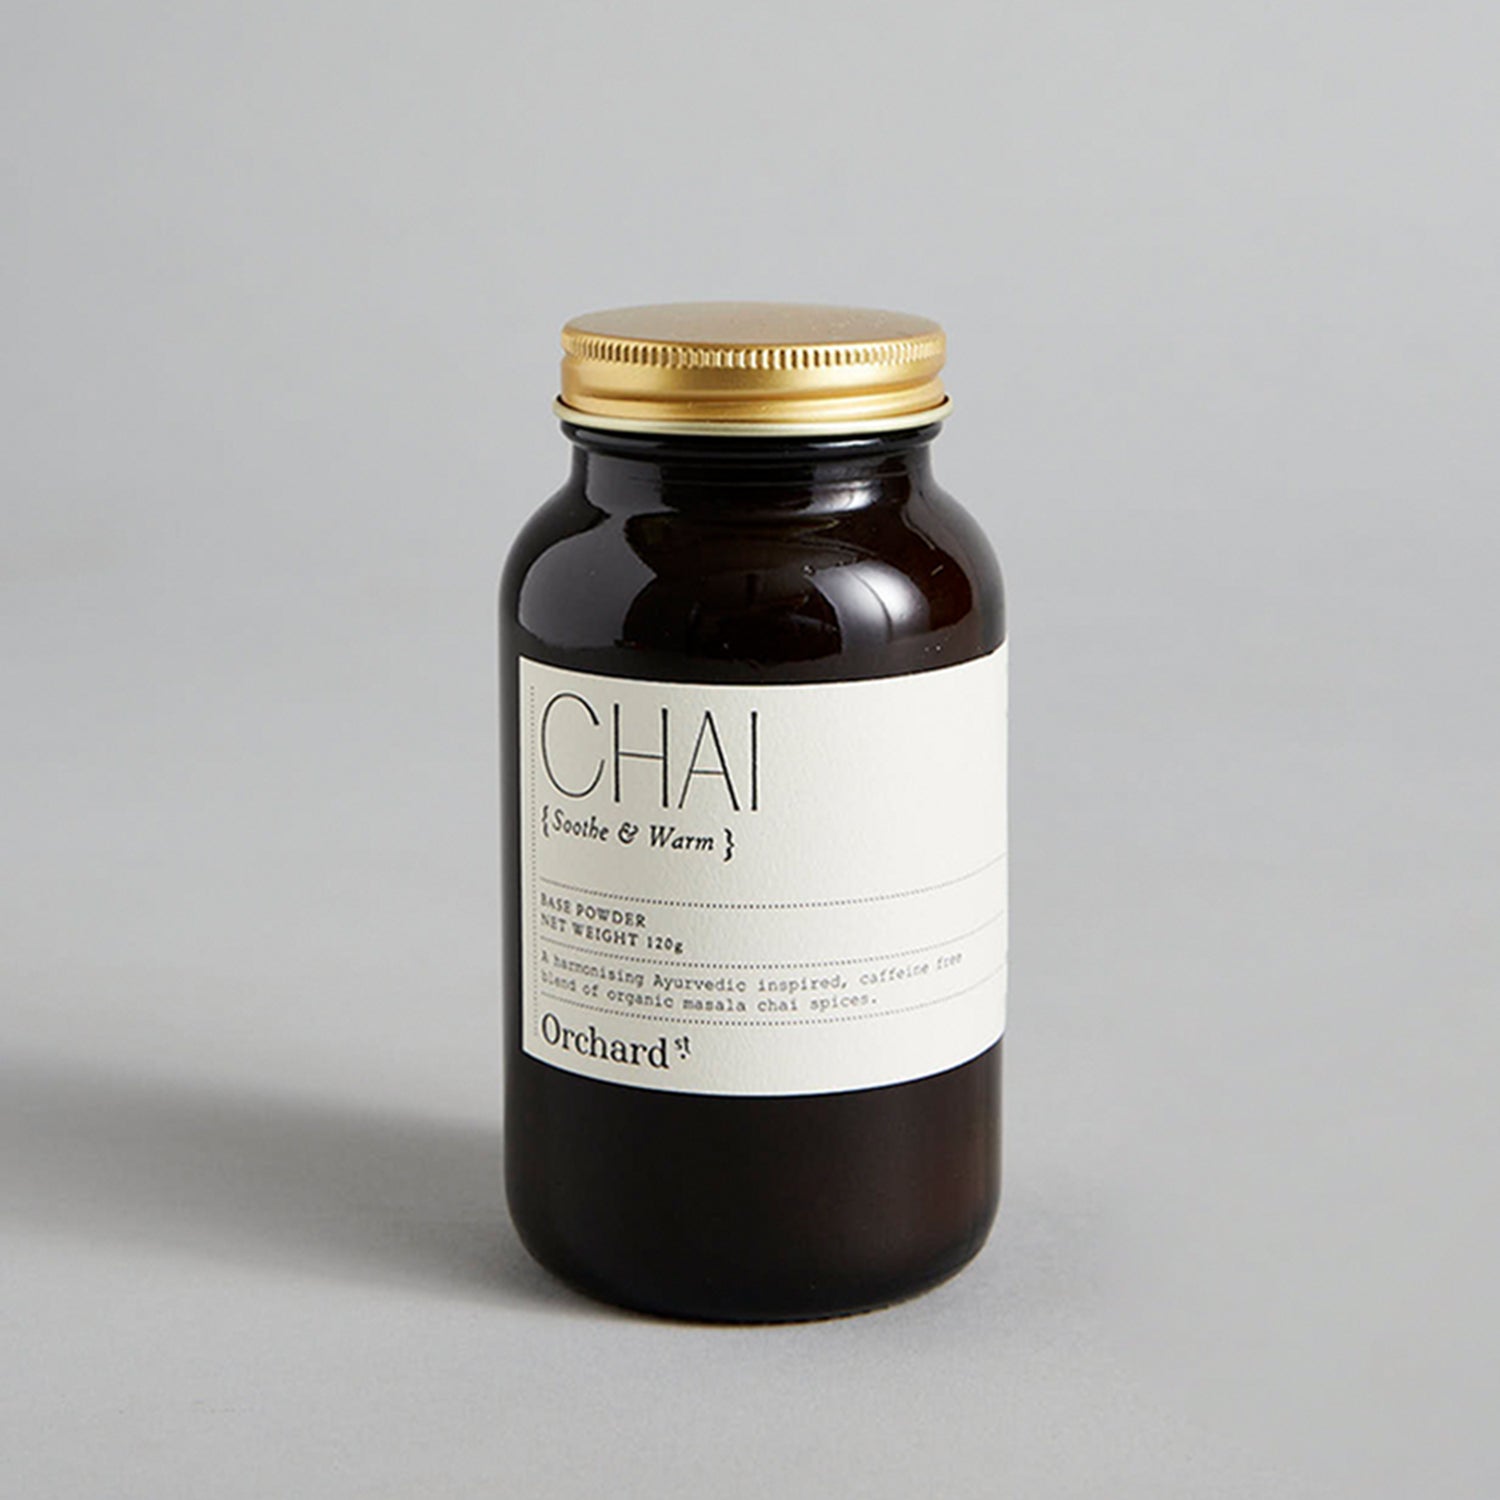 ORGANIC CHAI BLEND BY ORCHARD ST.